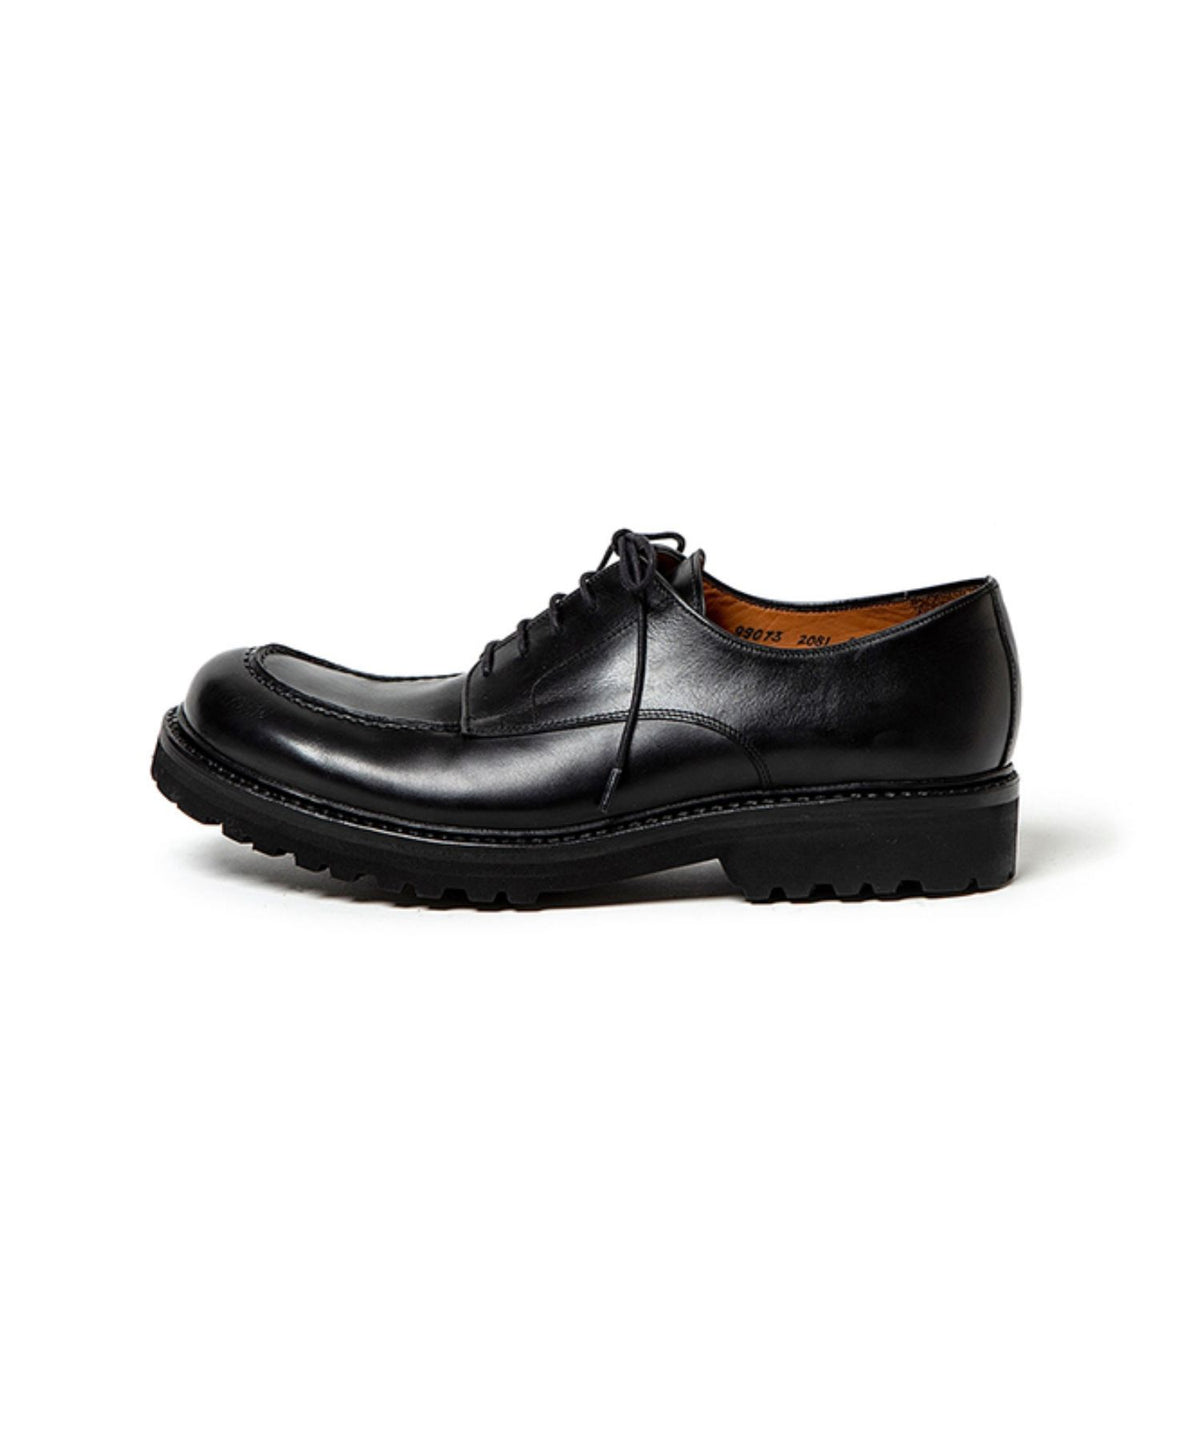 Dweller Lace Up Shoes Cow Leather